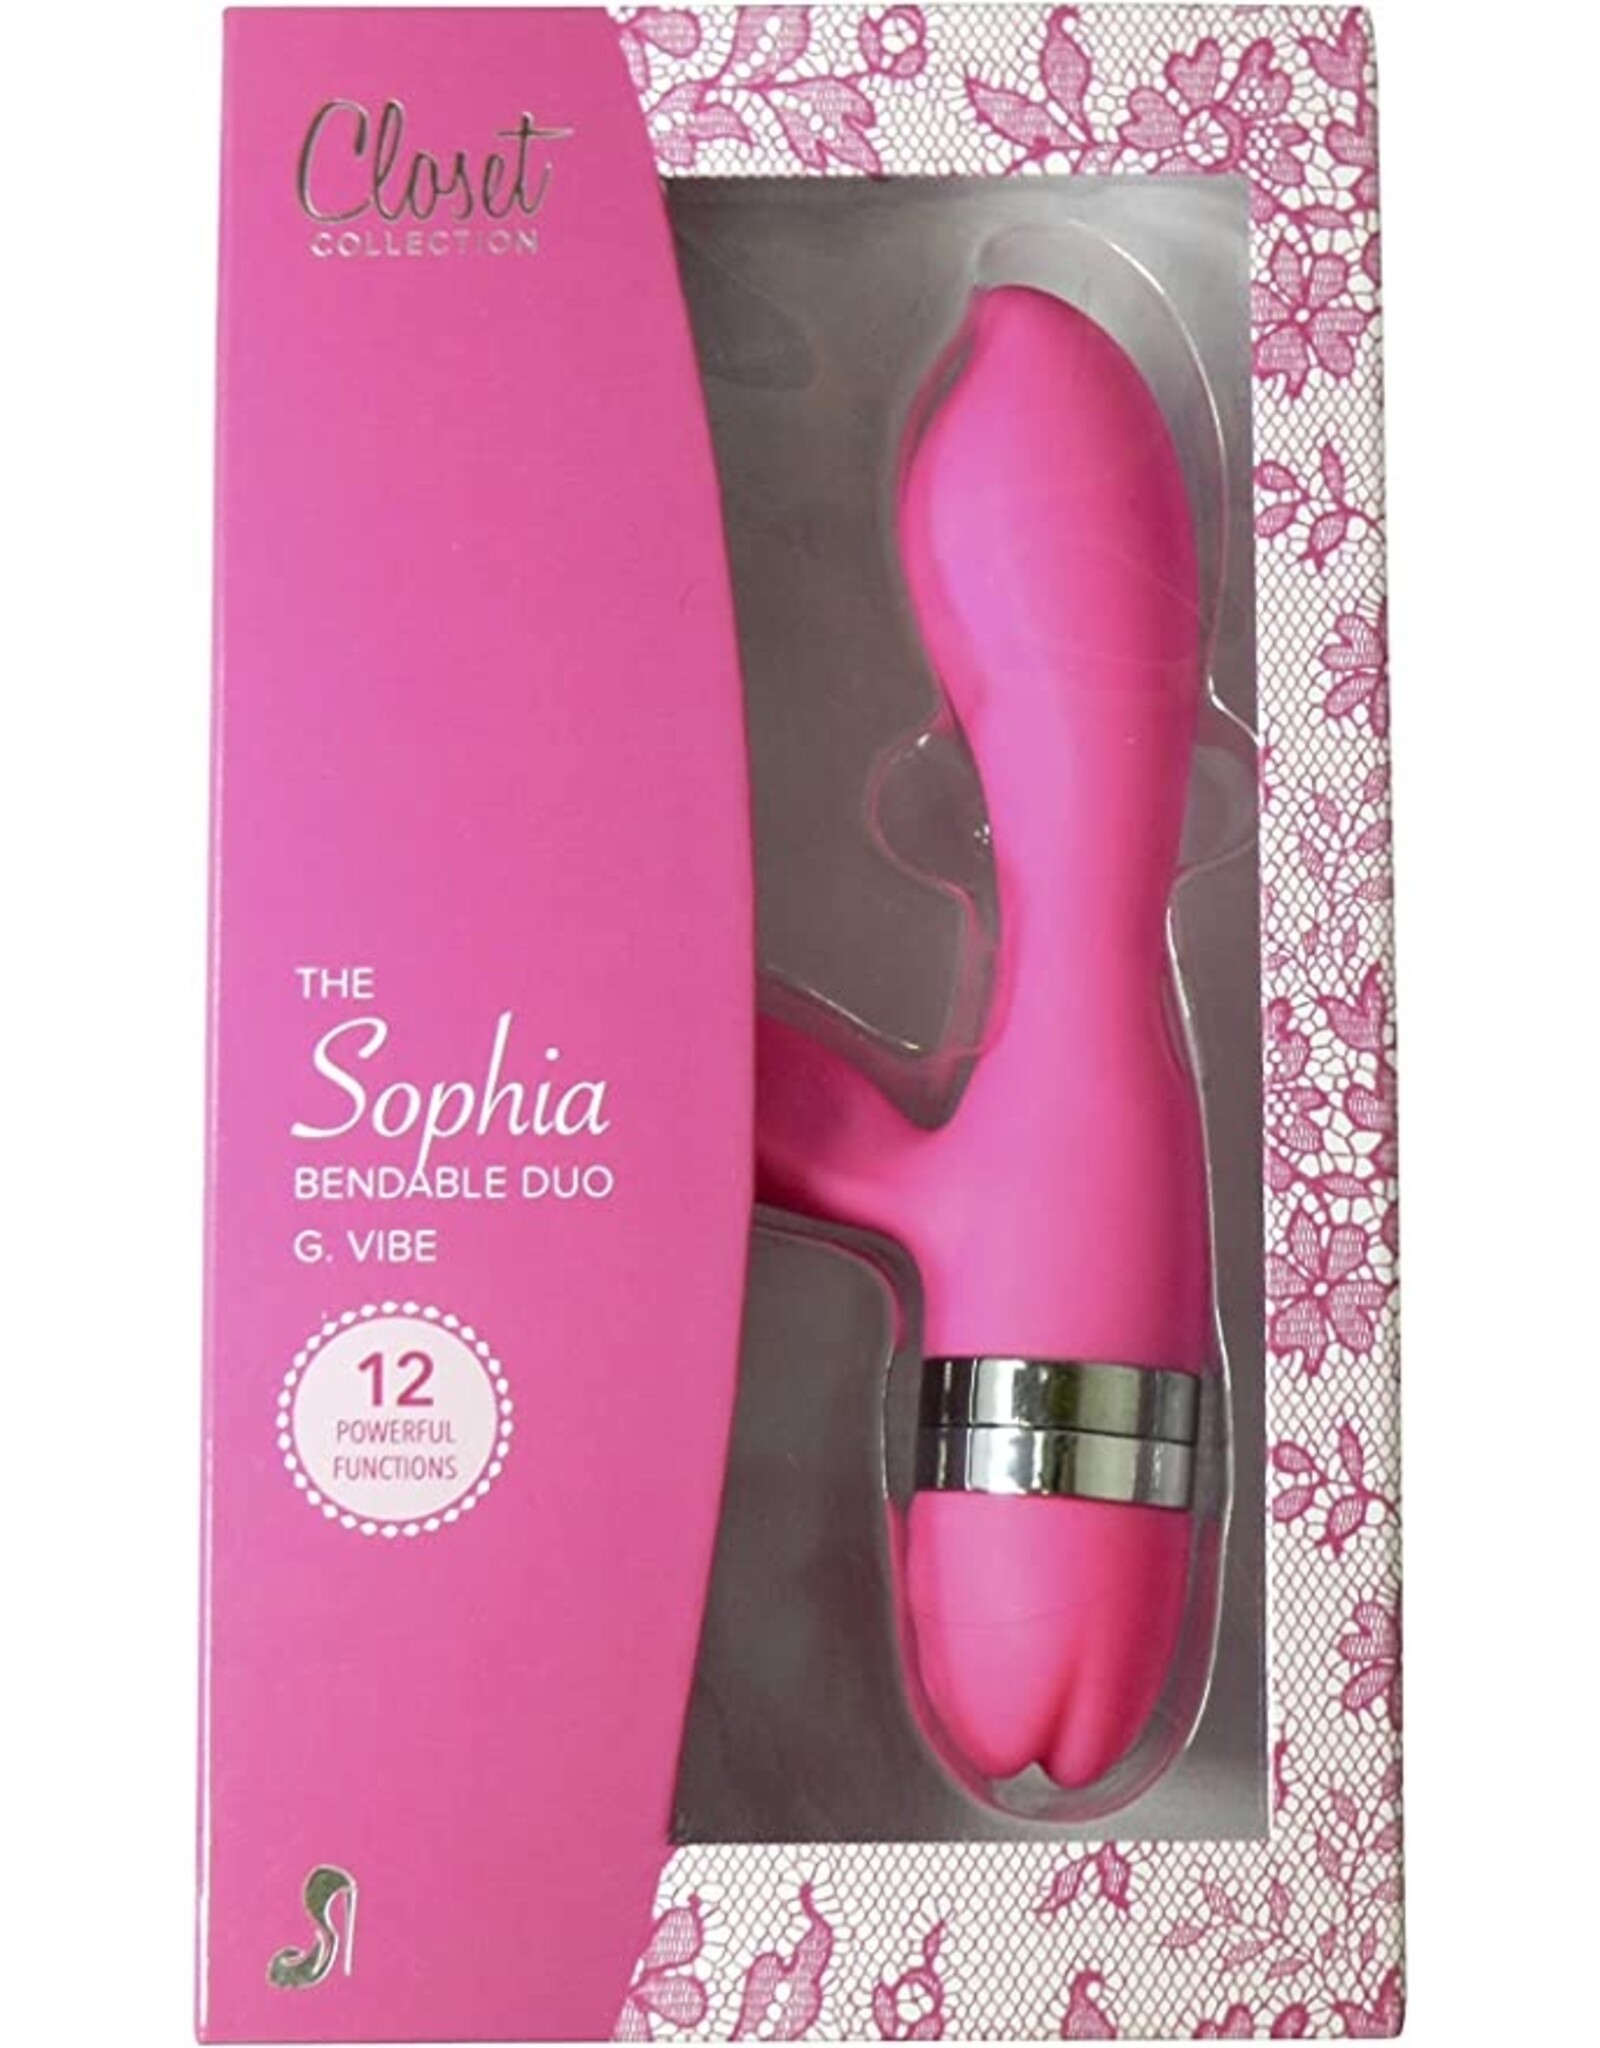 Closet Collection Closet Collection The Sophia Bendable Duo Pink